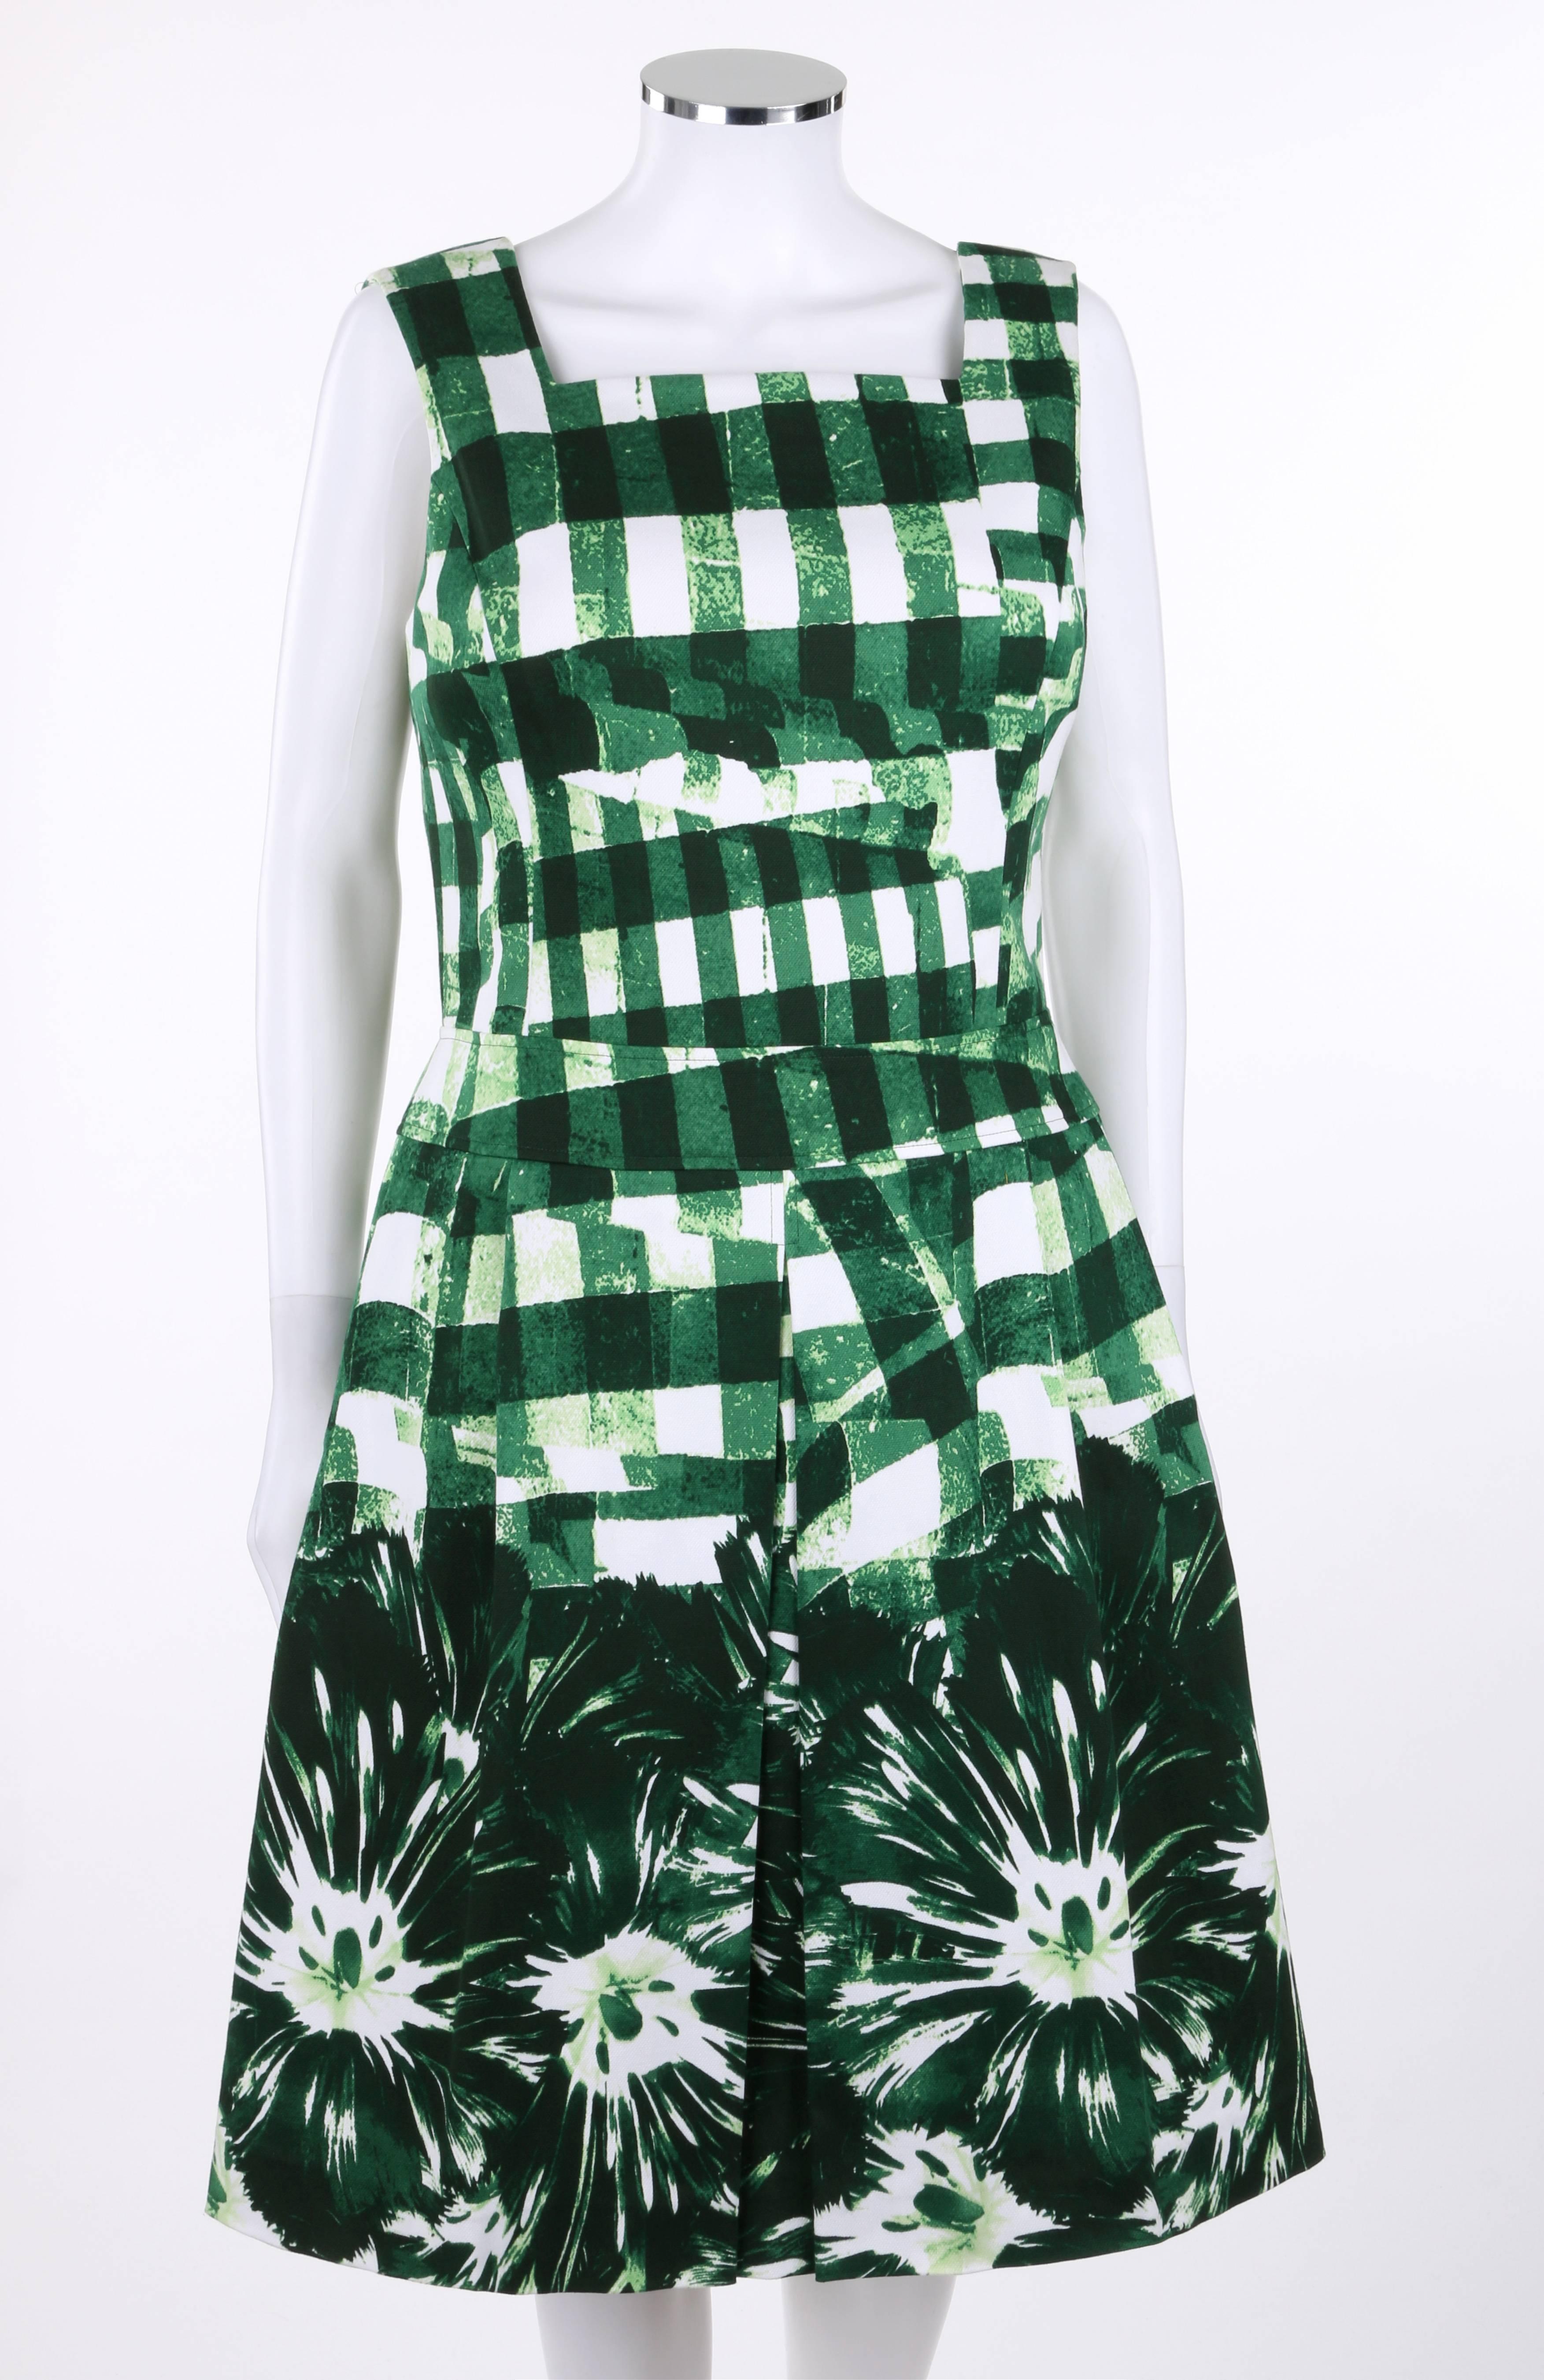 Oscar de la Renta Resort 2013 sleeveless cotton pique day dress. Runway look #36. Green and white painterly gingham print with large floral print at hem. Square neckline. Princess seams. Banded waist. Center front inverted box pleat and two side